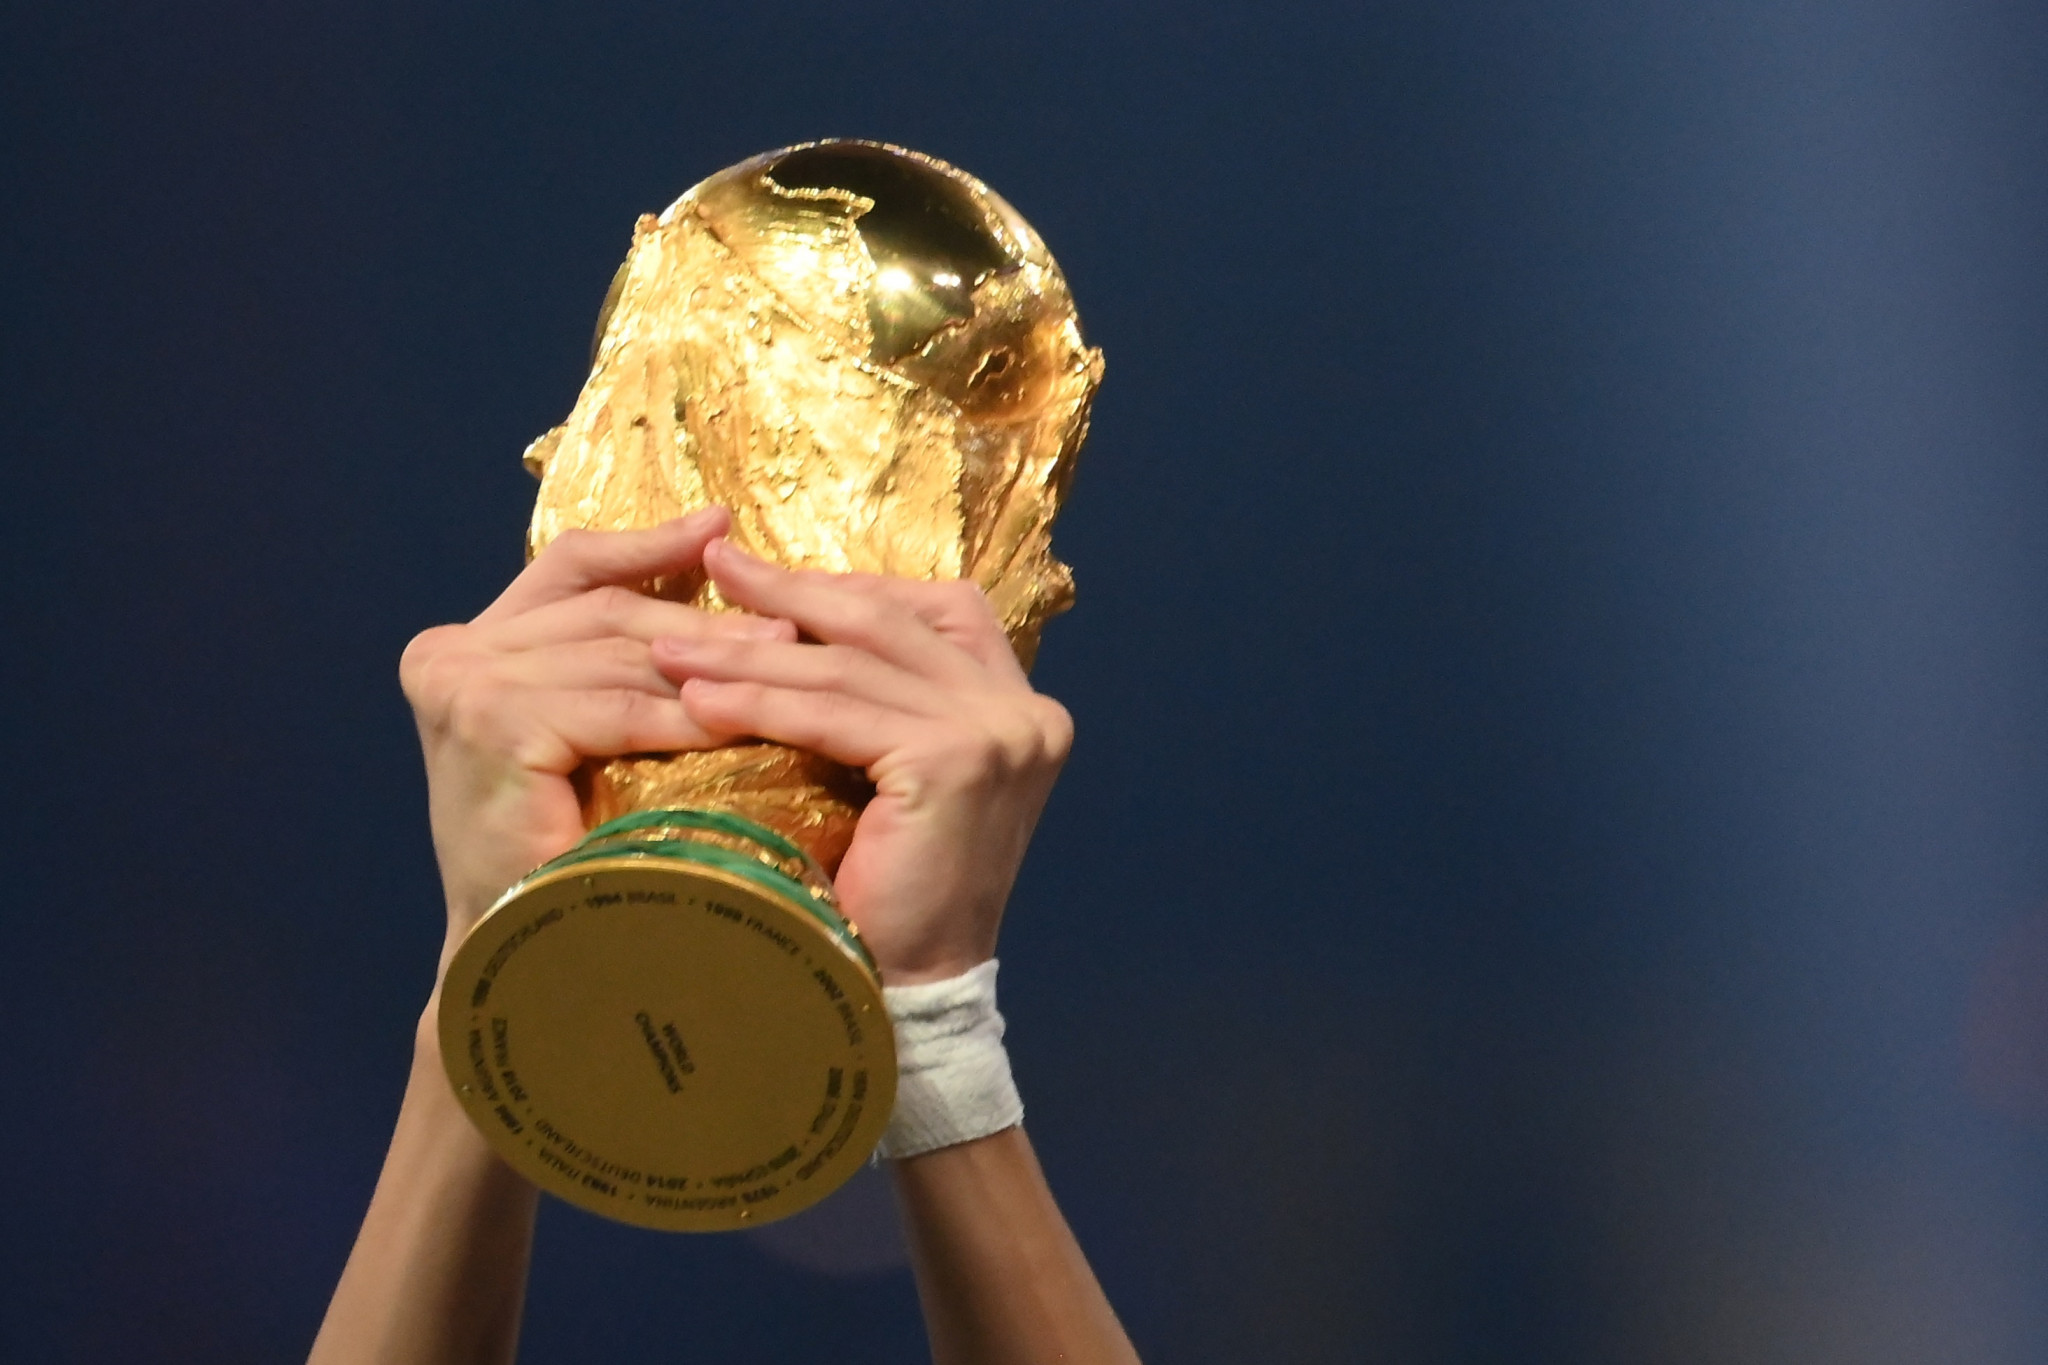 A YouGov online poll found that majority of people surveyed believe human rights should be a key factor in determining the winning bid for the 2030 FIFA World Cup ©Getty Images